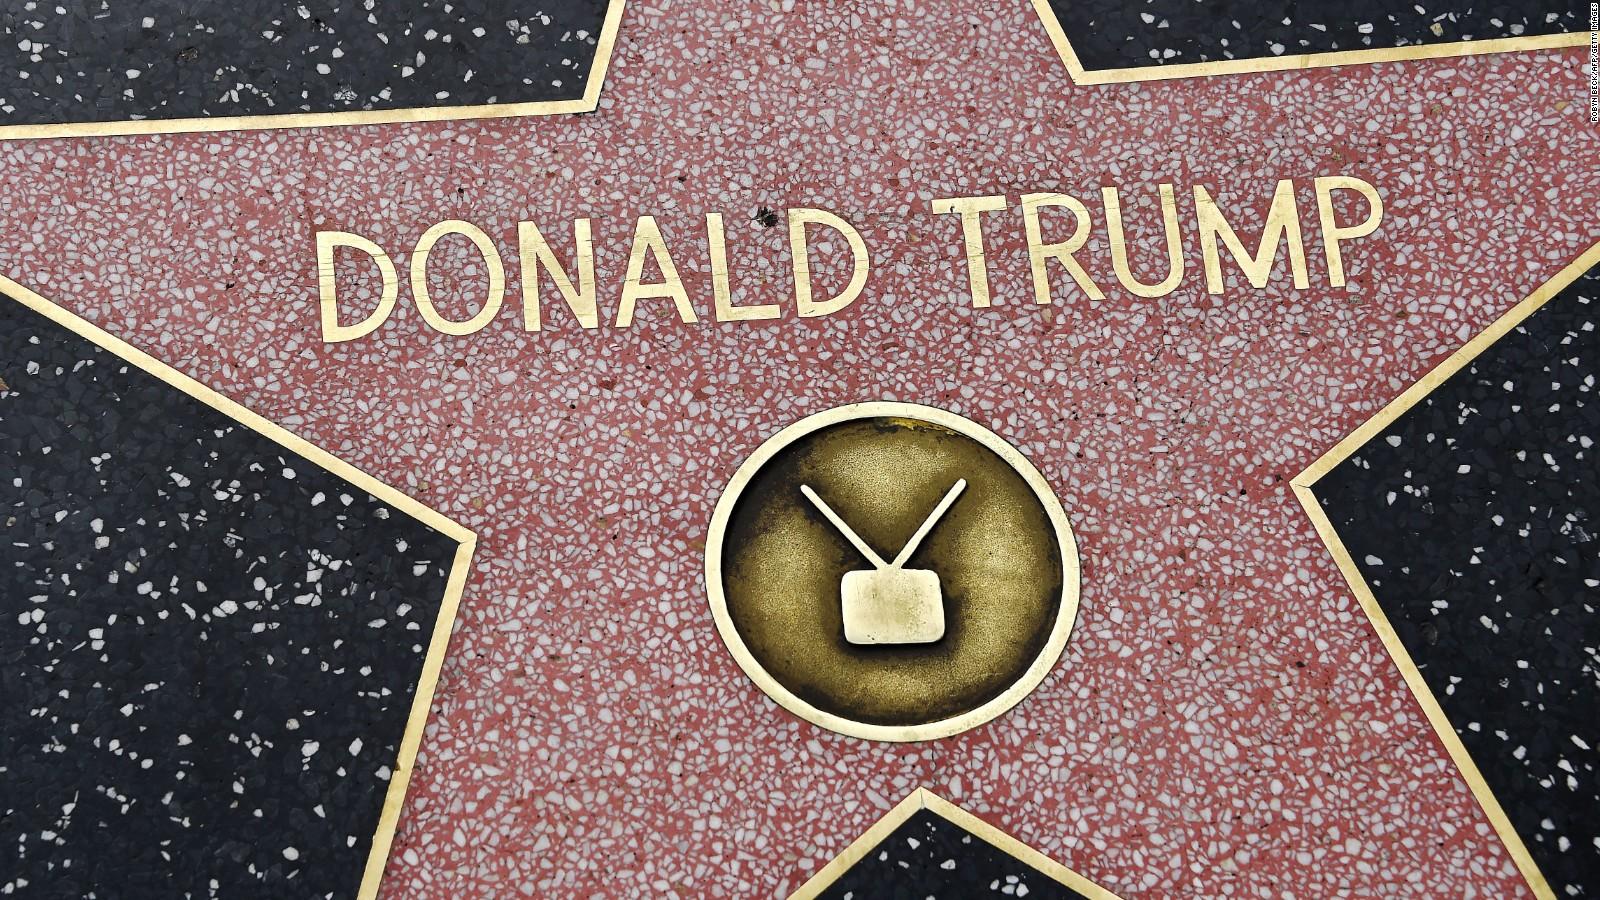 Trump's Hollywood star getting mixed reactions (2016)